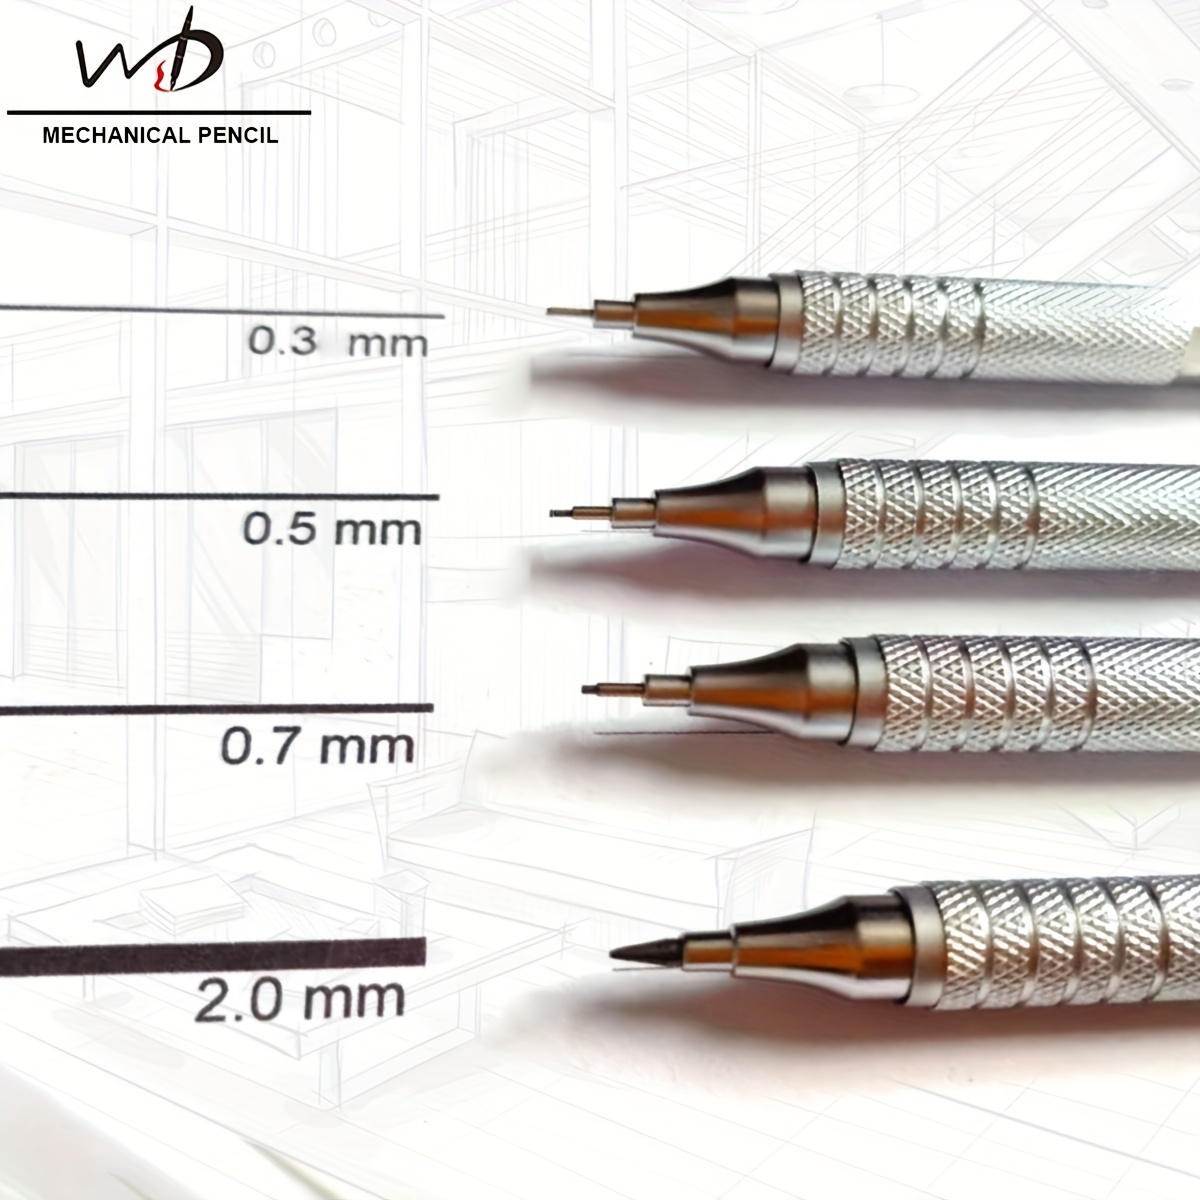 The Decline Of The 2.0mm Mechanical/Clutch/Sketch Pencil/Leadholder, by  synapticloop